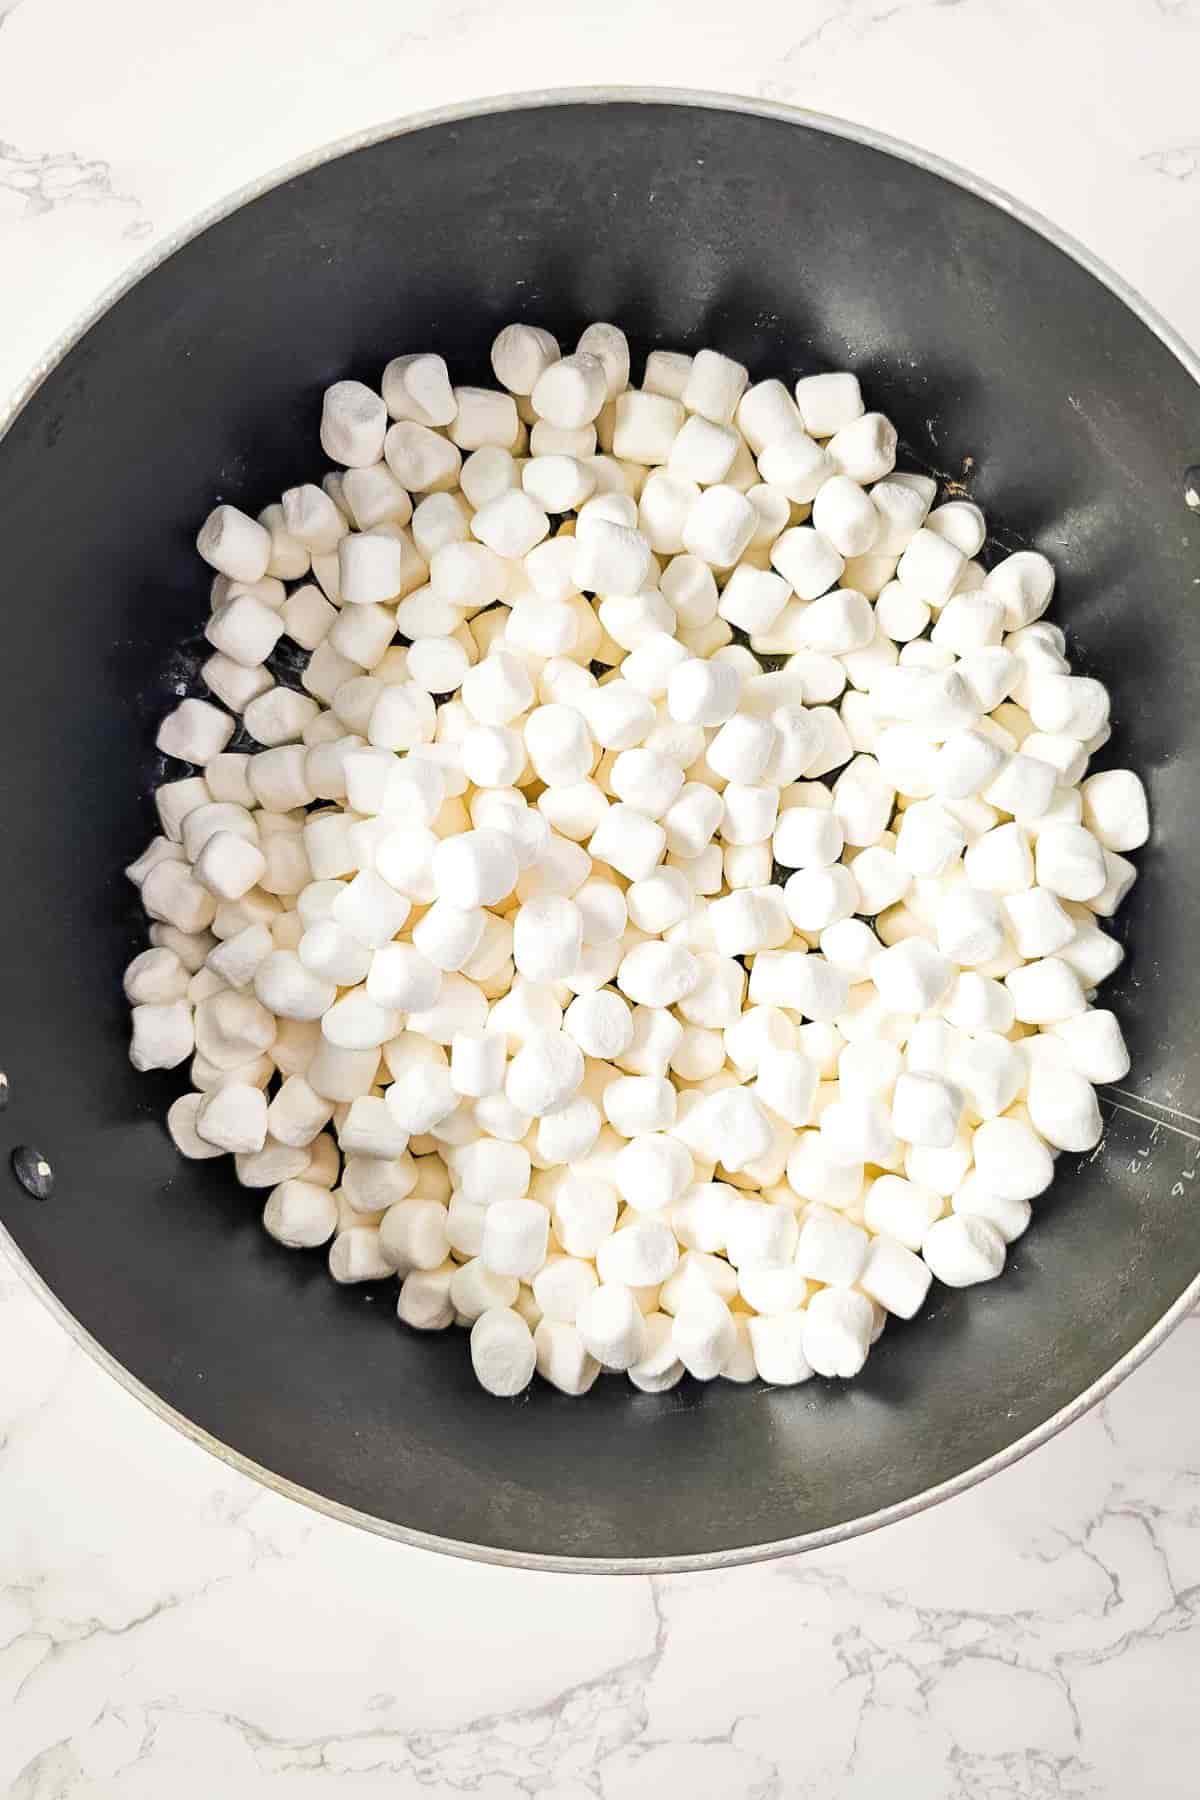 A black pan filled with white marshmallows on a marble surface.